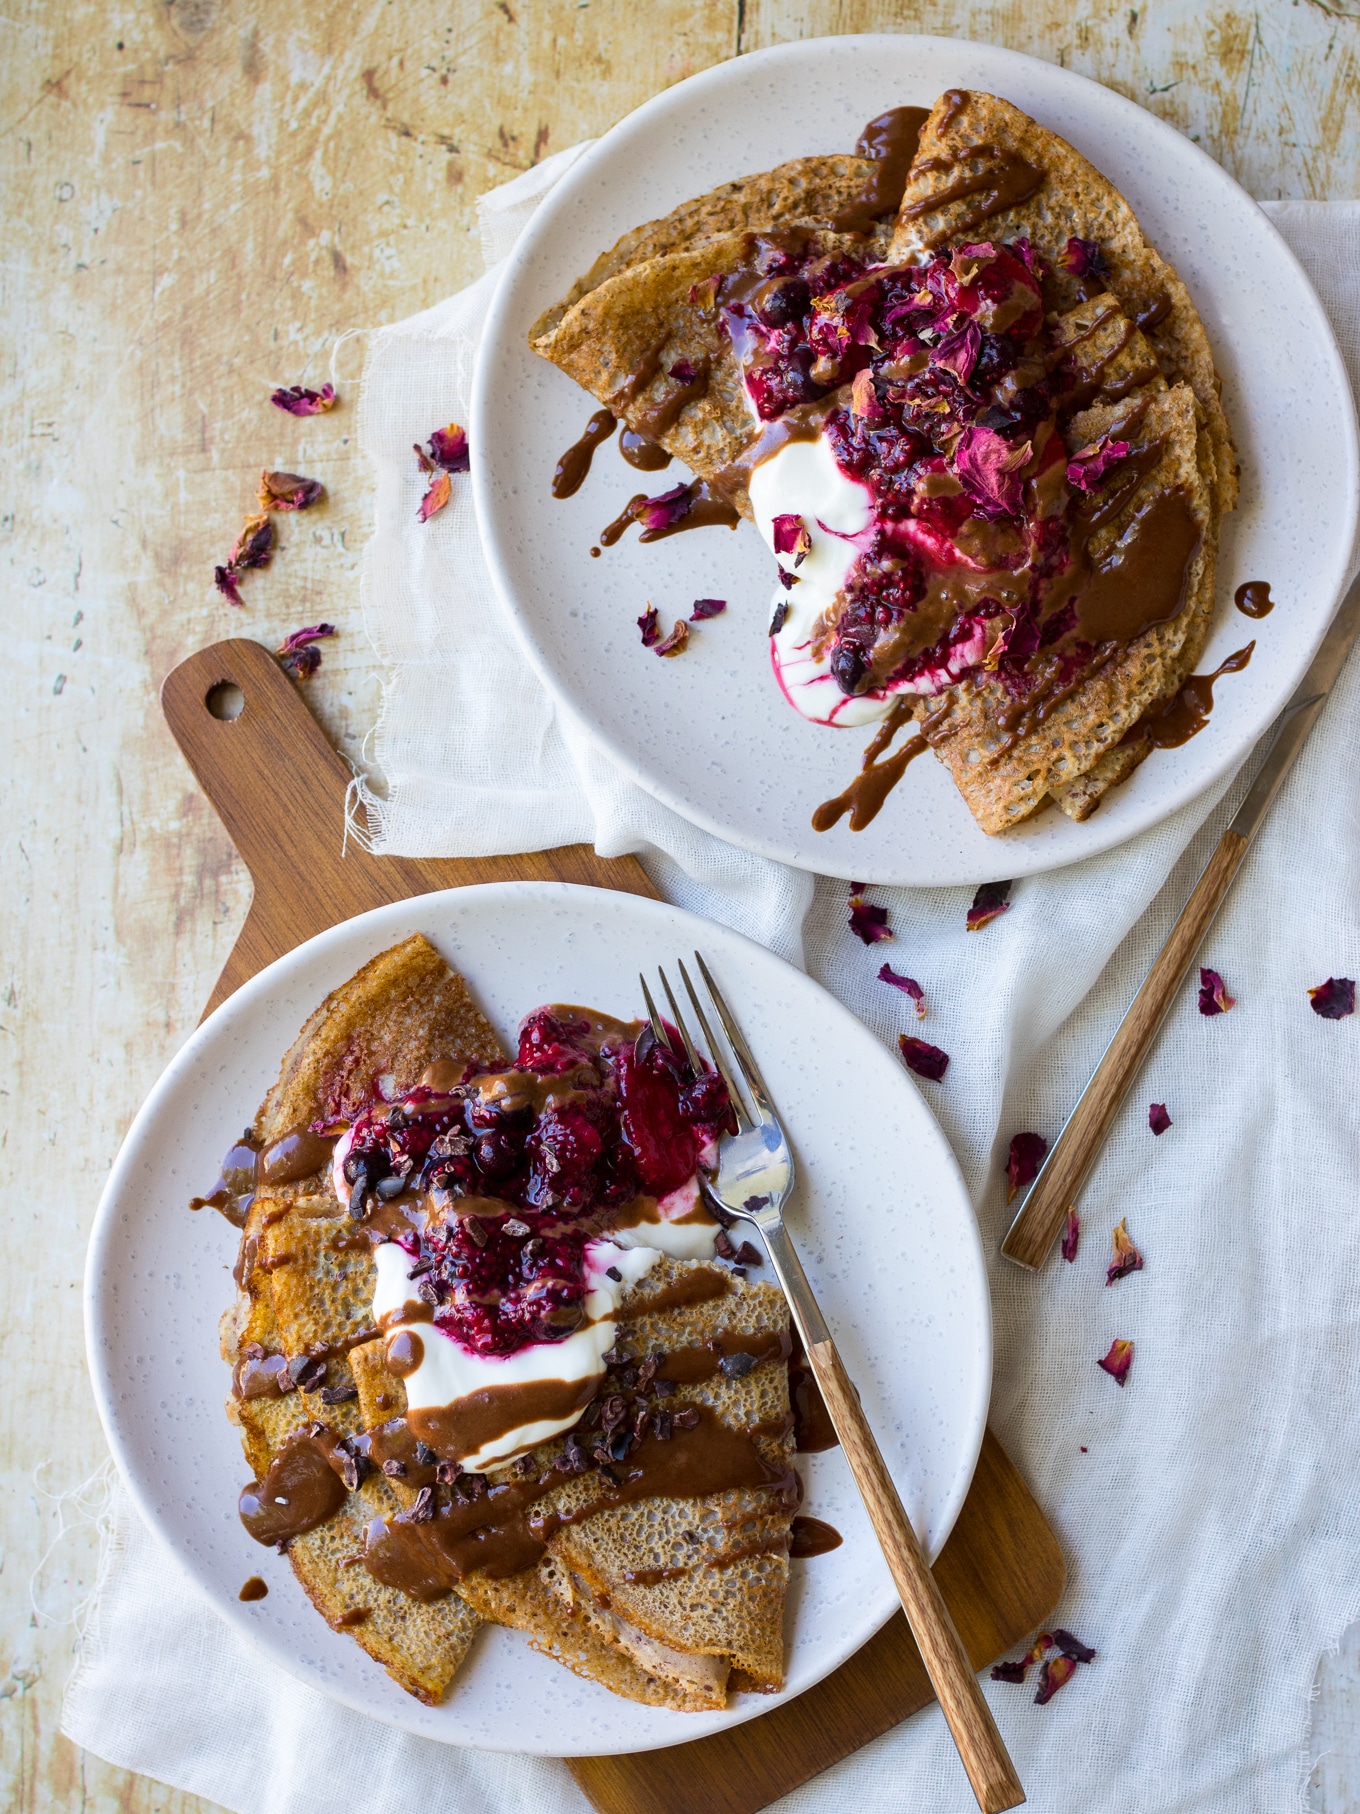 Two plates of vegan buckwheat crepes. Folded crepes with yoghurt, berry sauce and chocolate sauce drizzle.